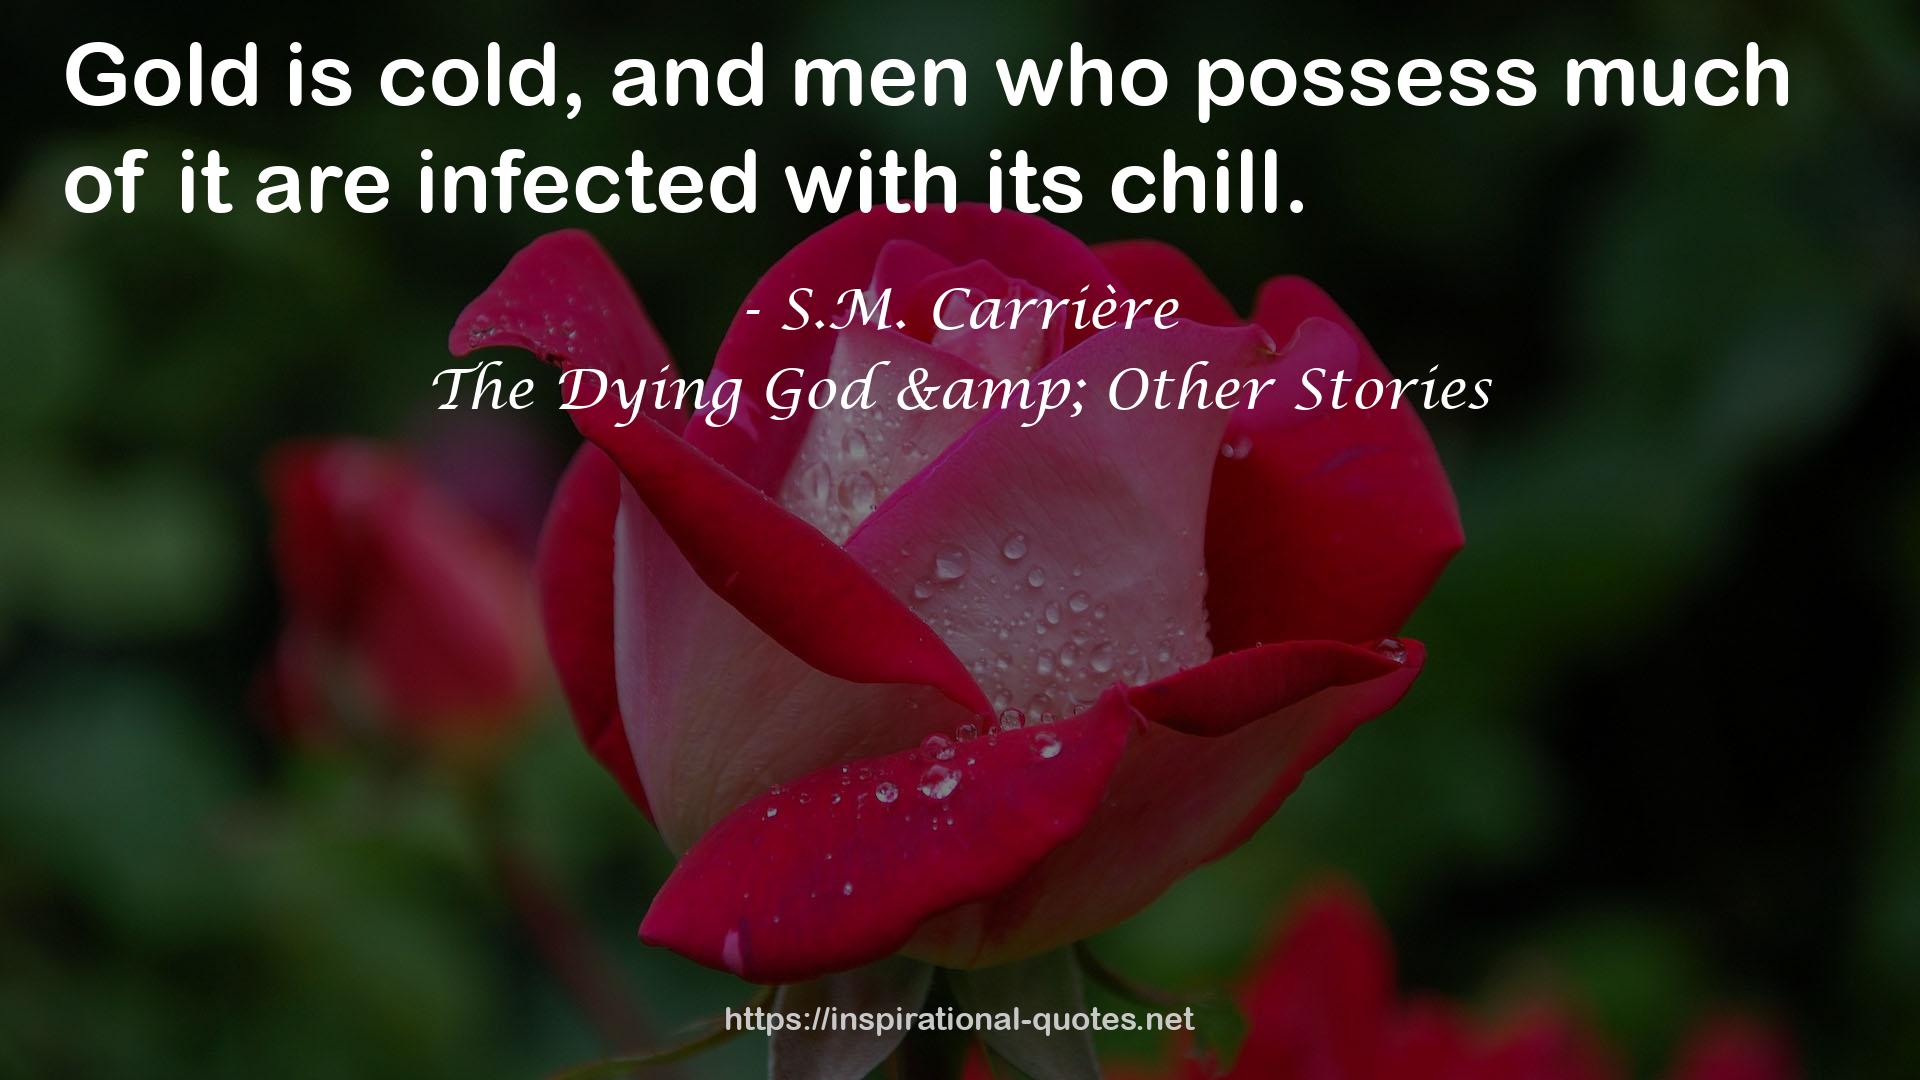 The Dying God & Other Stories QUOTES